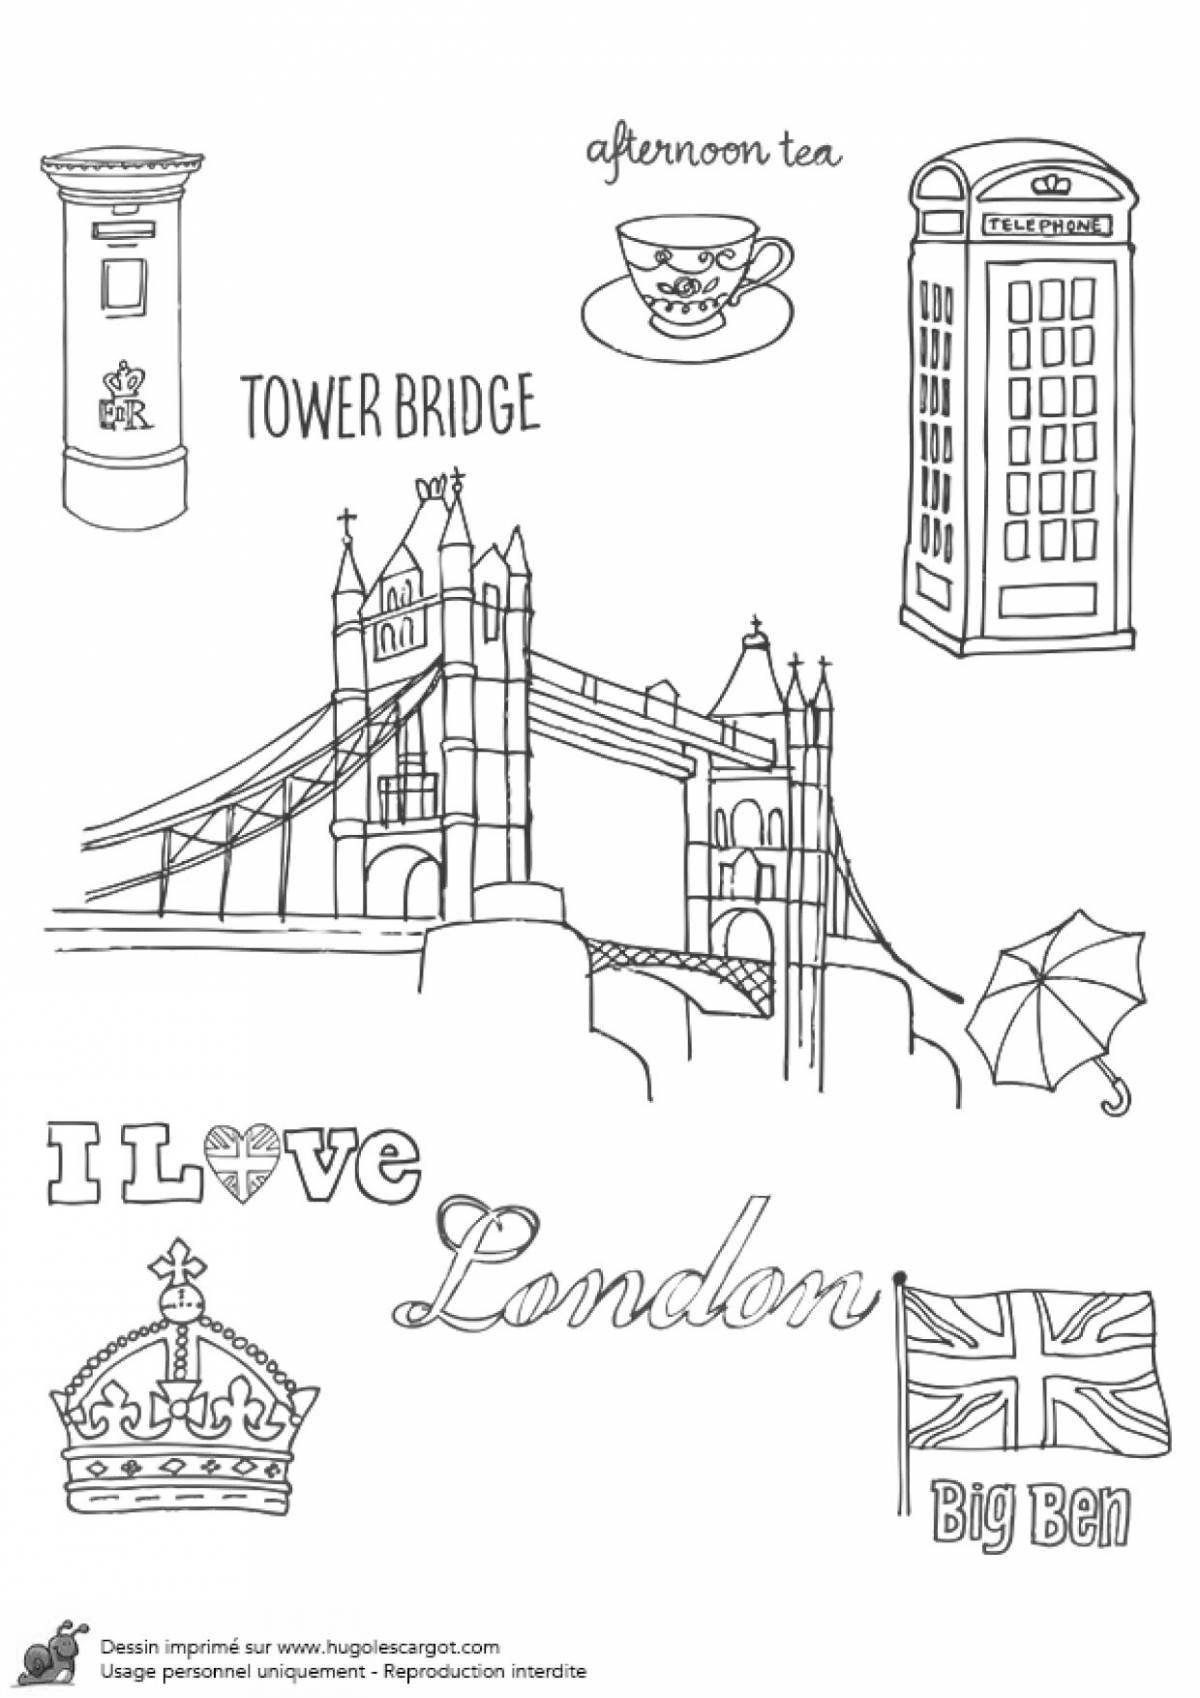 London luxury sights coloring book